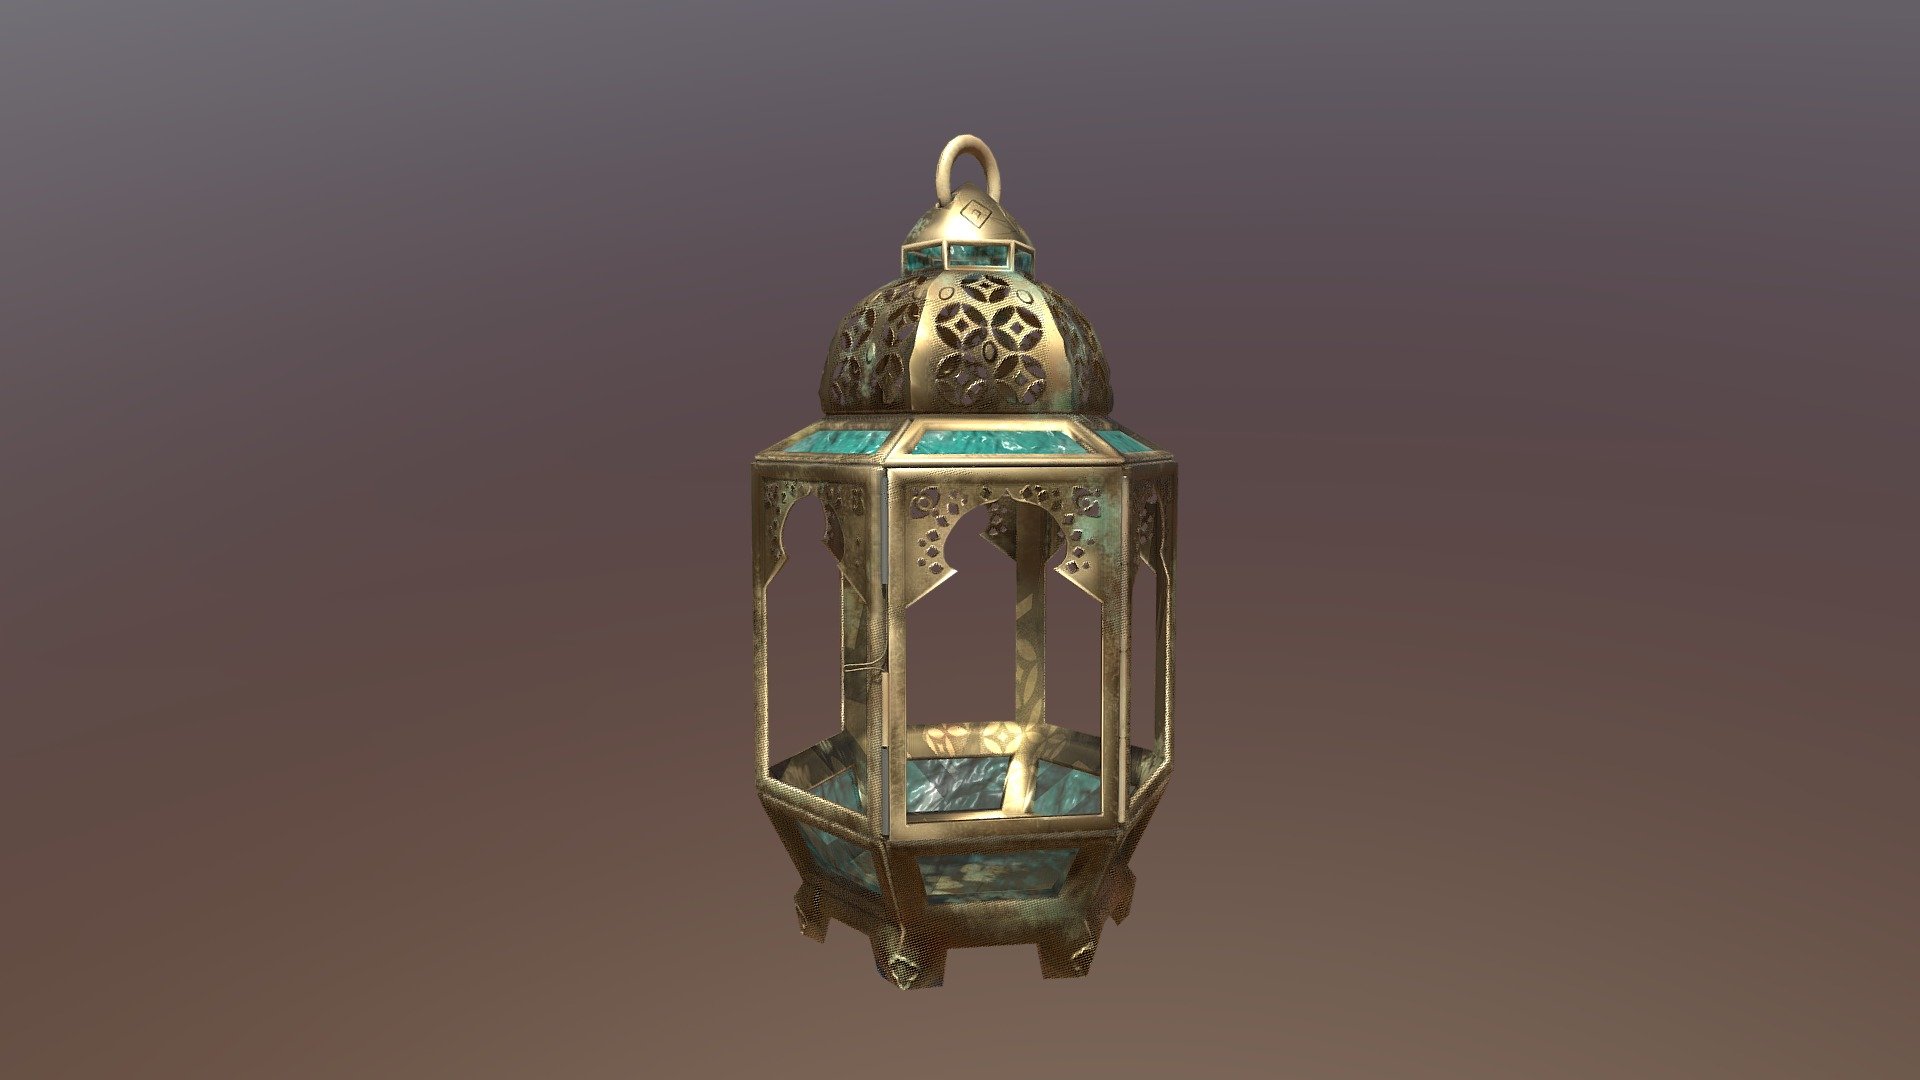 A lantern prop modeled for my collaborative level project. Inspired by ancient India and modern appreciation of their architecture 3d model